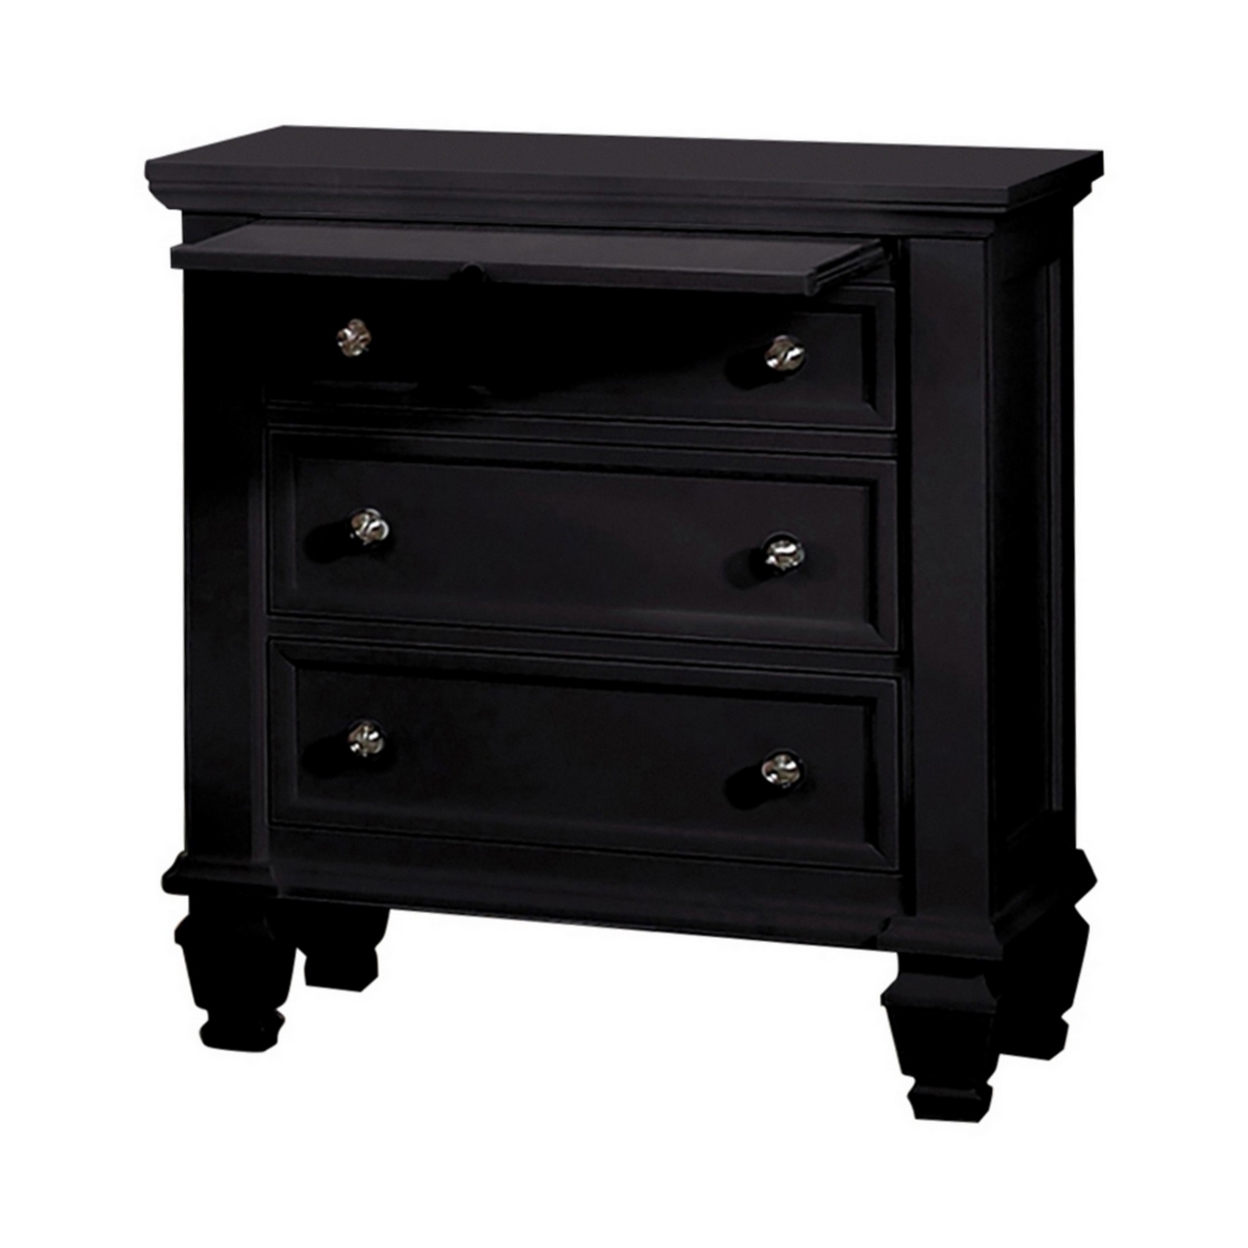 Lila 30 Inch Nightstand With Slide Out Tray, Felt Lined Top Drawer, Black- Saltoro Sherpi